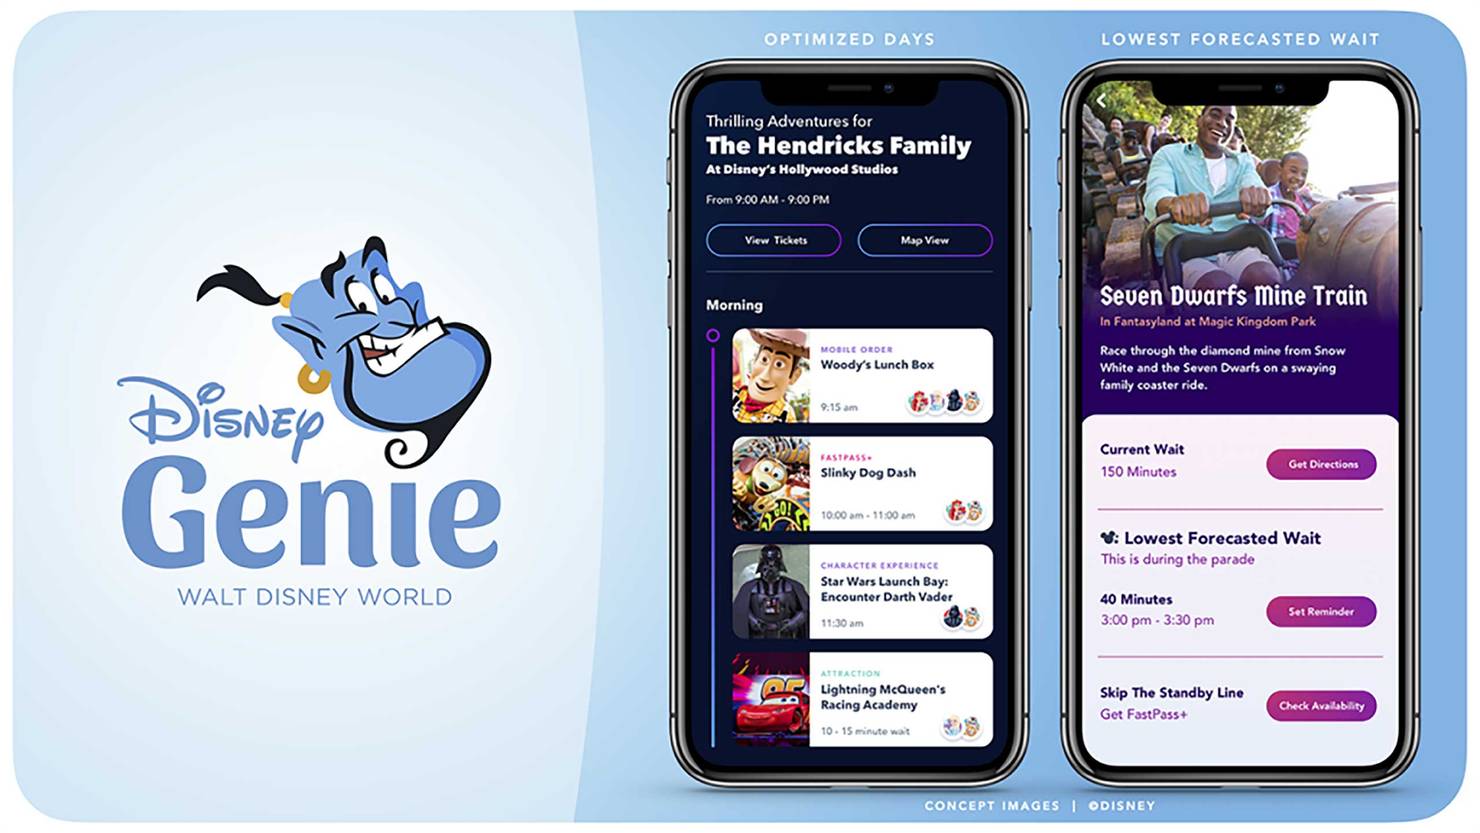 Disney Genie may be the interface that introduces paid admission to a ride